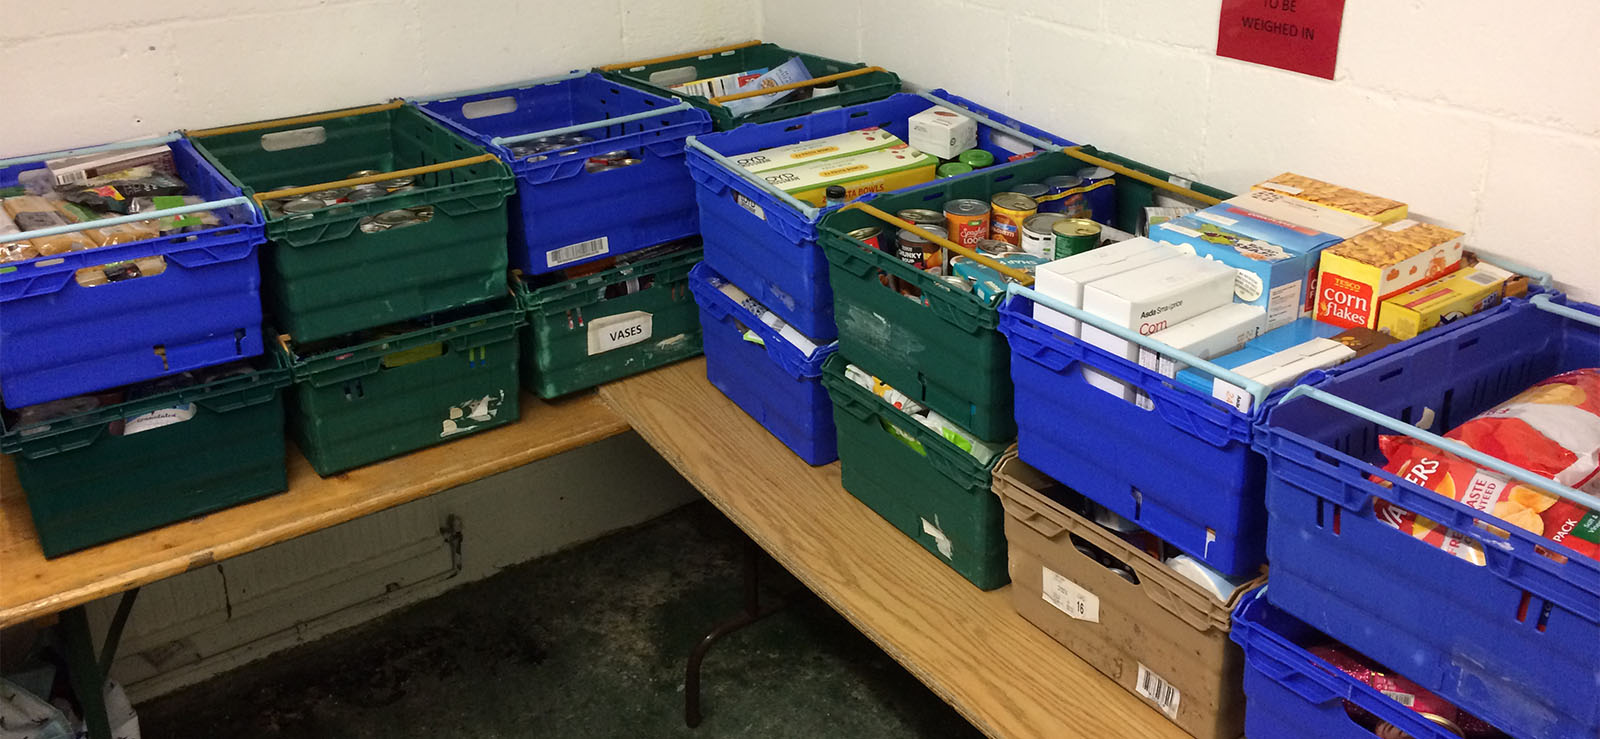 Bournemouth Foodbank autumn food collection donation